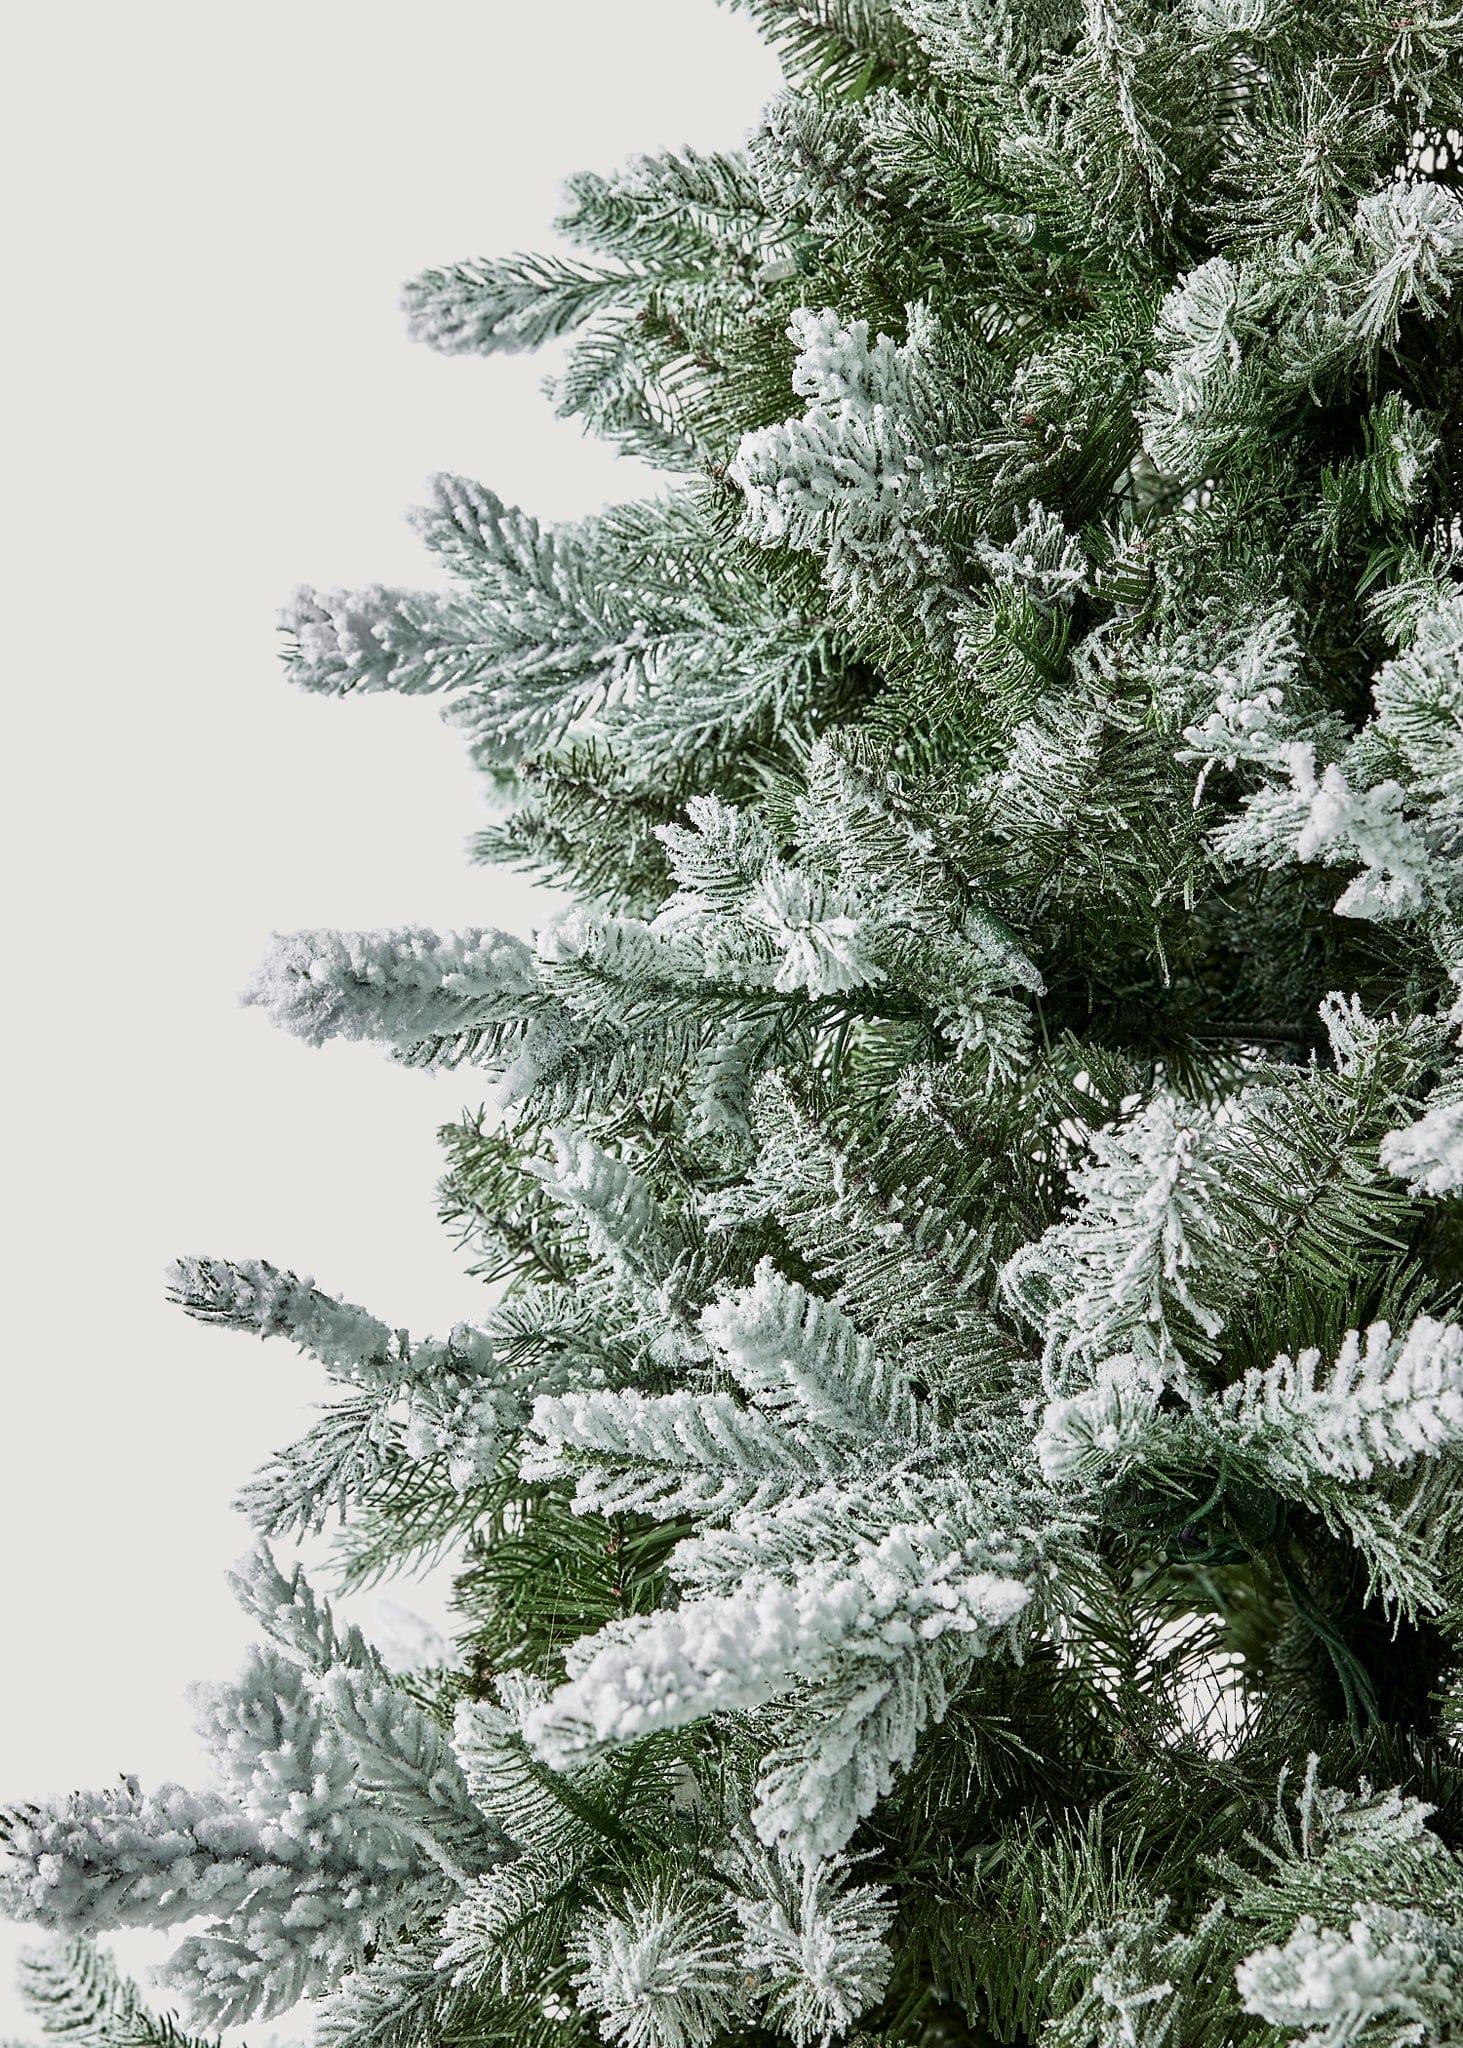 Frosted Pine Artificial Christmas Tree Branches in Closeup View